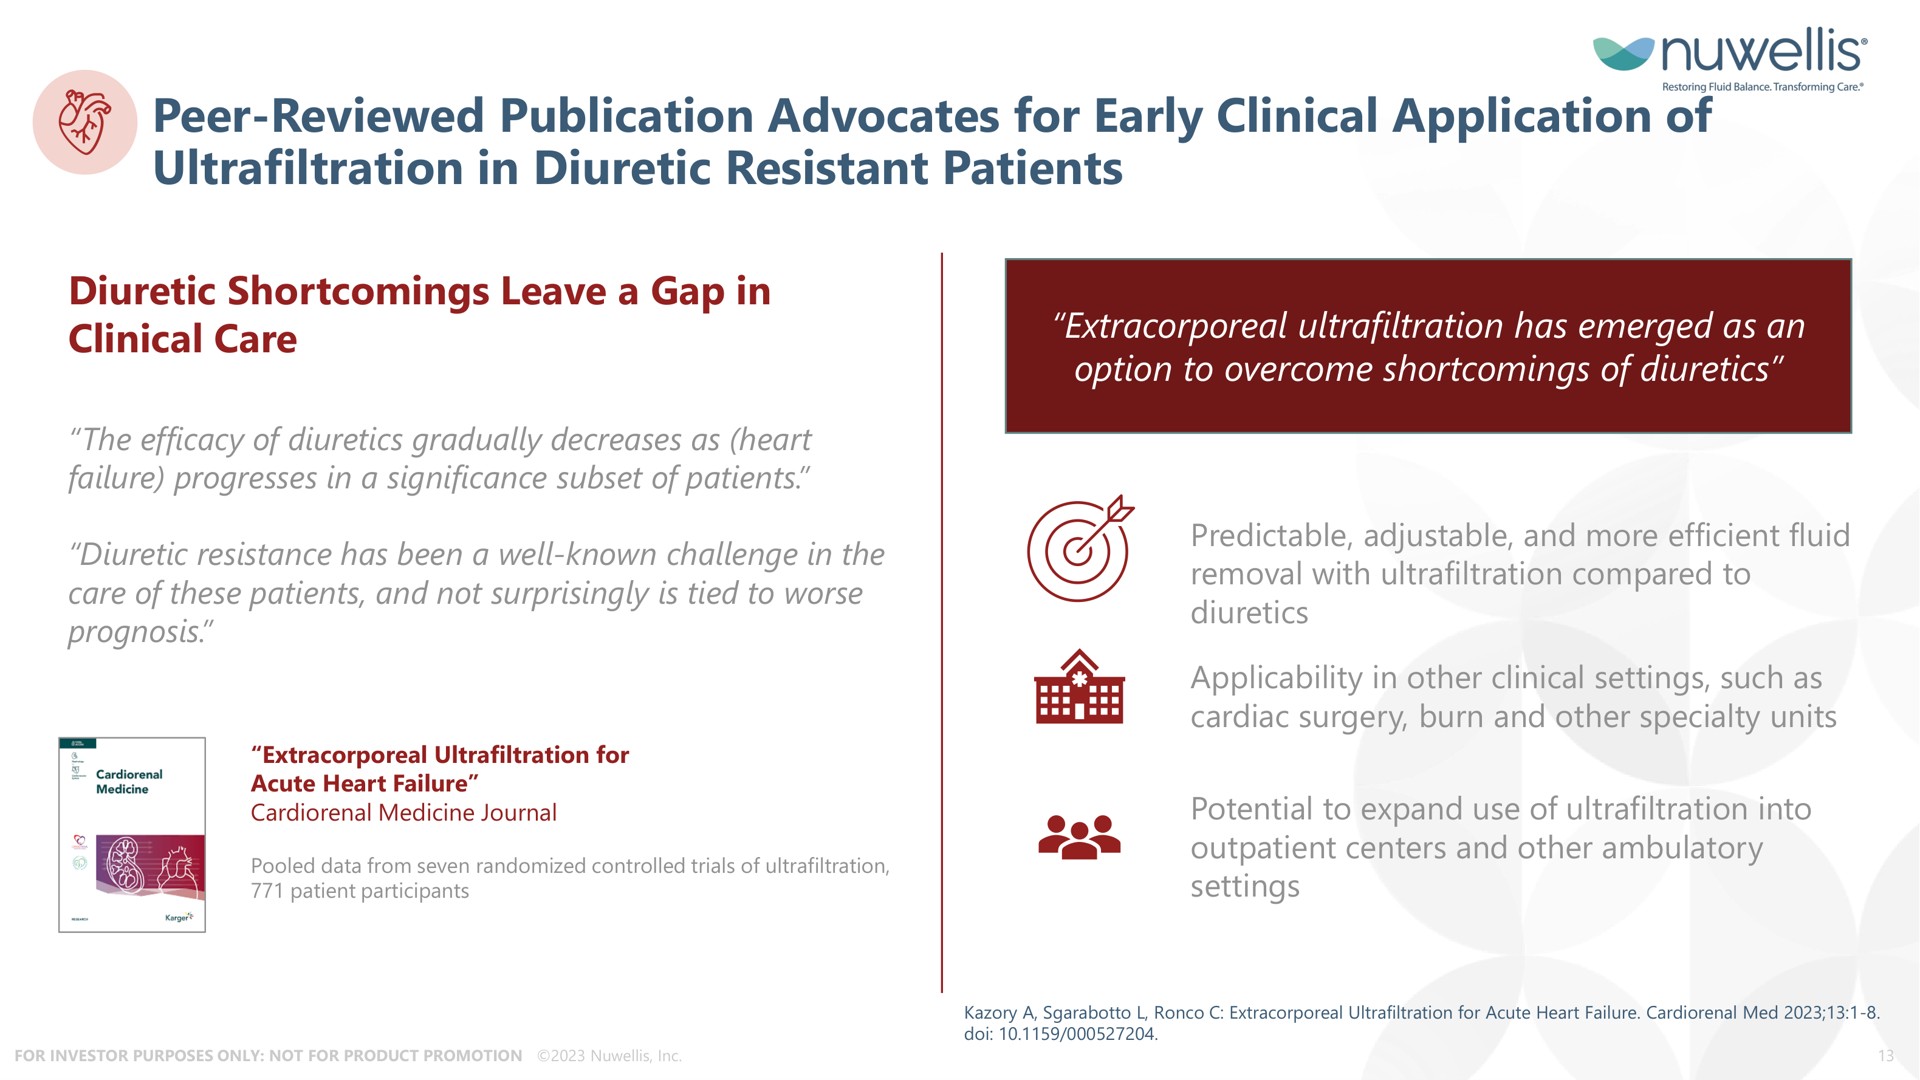 peer reviewed publication advocates for early clinical application of ultrafiltration in diuretic resistant patients shortcomings leave a gap care | Nuwellis